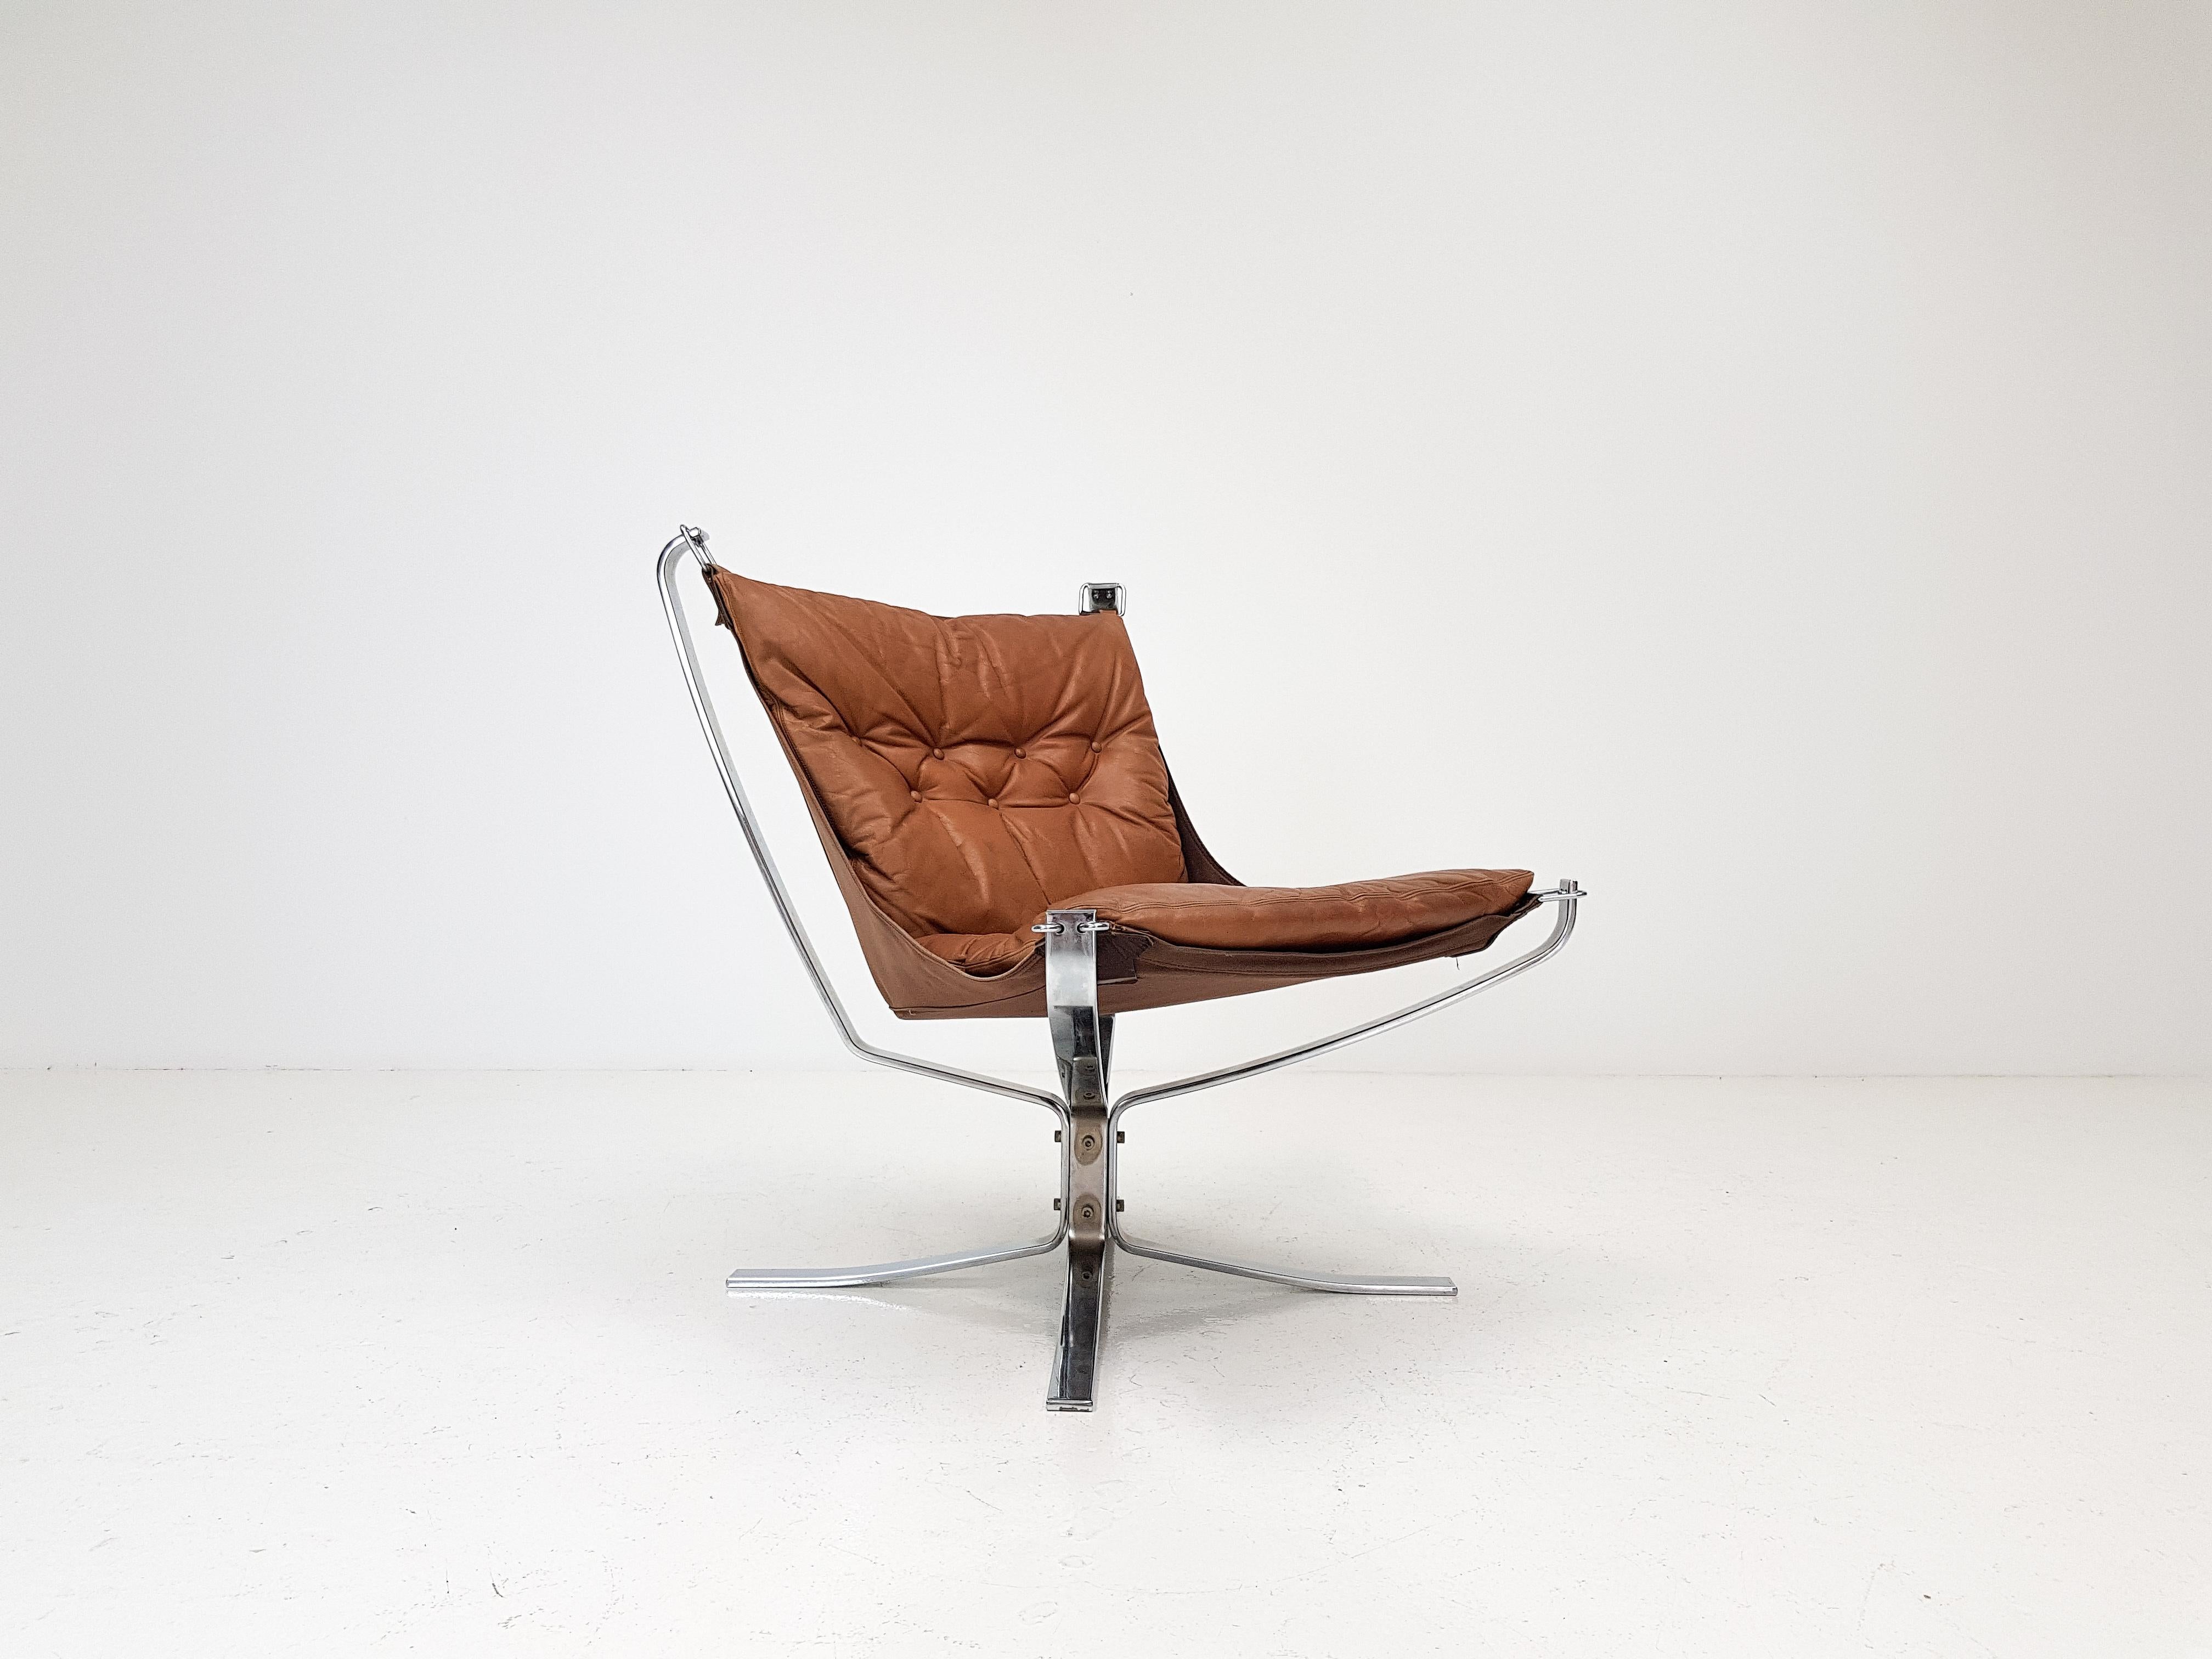 Norwegian Chrome Based Cognac Leather Sigurd Ressell Designed 1970s Falcon Chair, 1970s